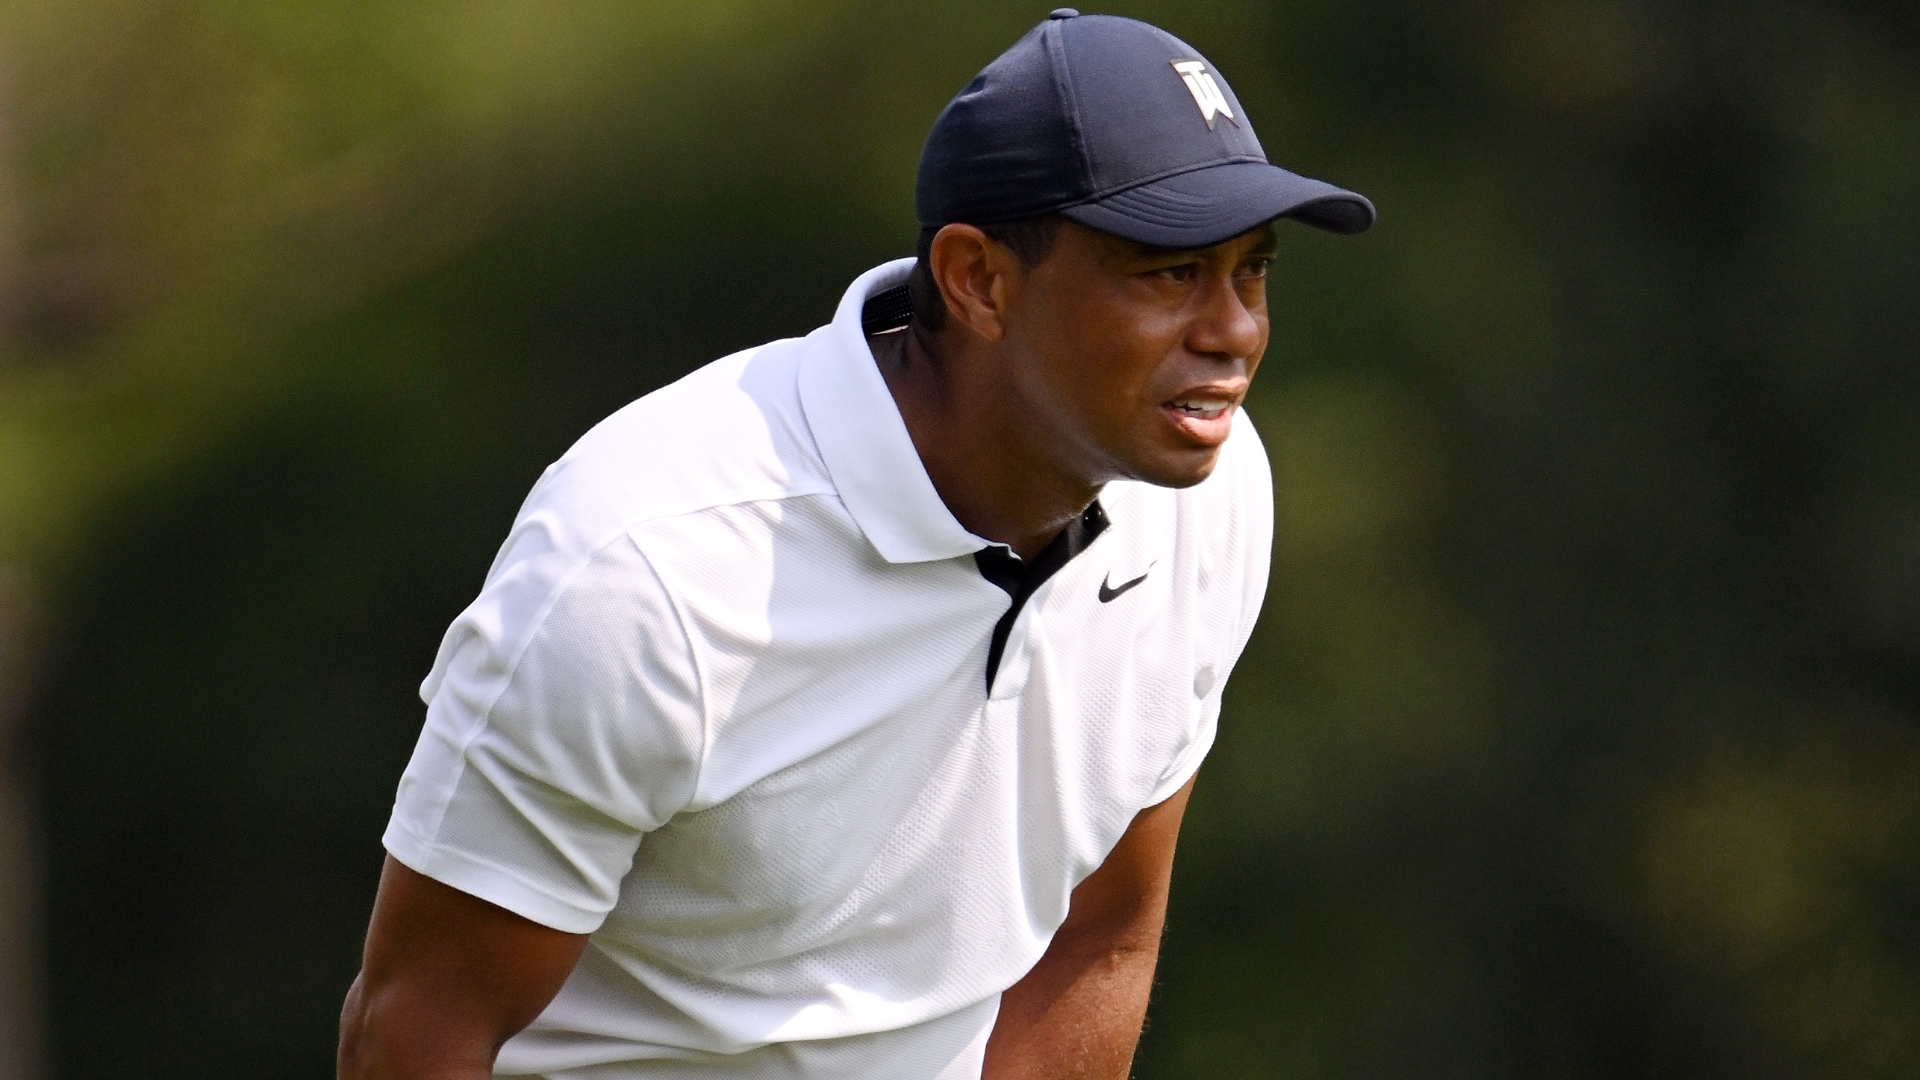 Tiger's sensational chip nearly goes in for eagle